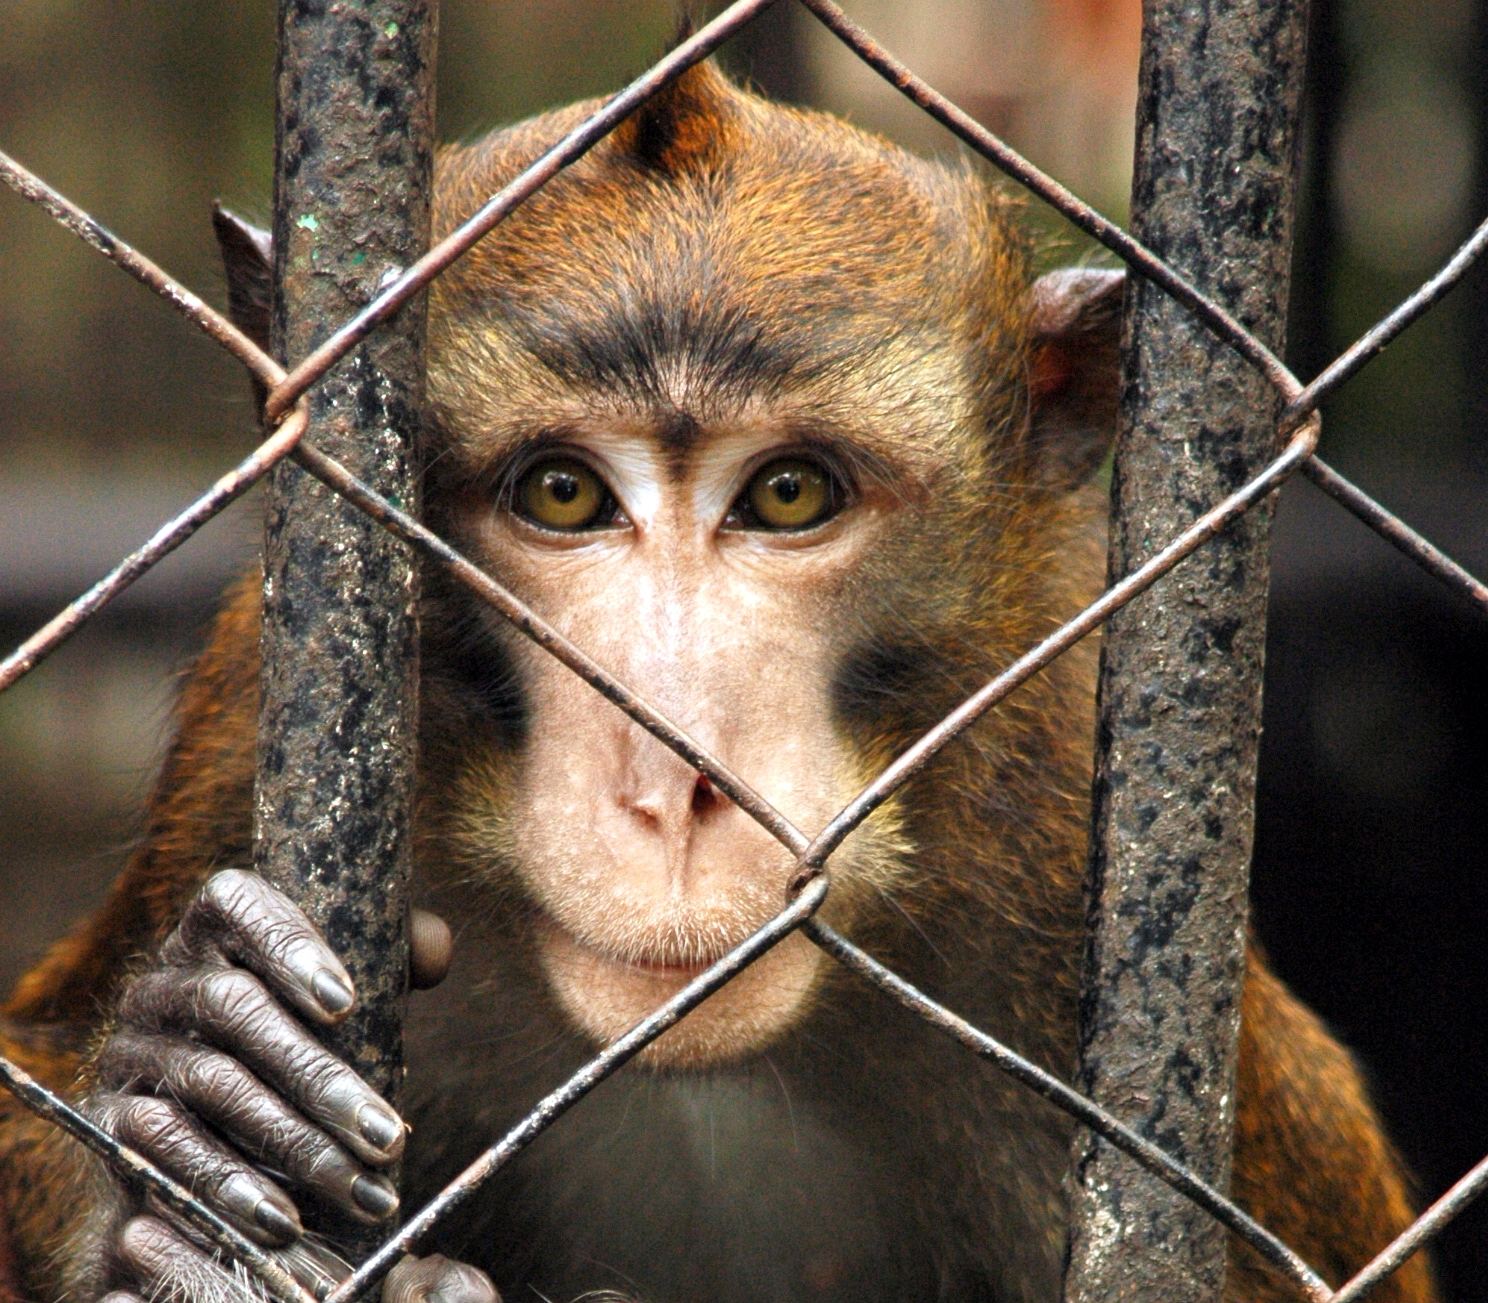 Animals Aren’t ‘Freight’: 10 Ways You Can Help Them